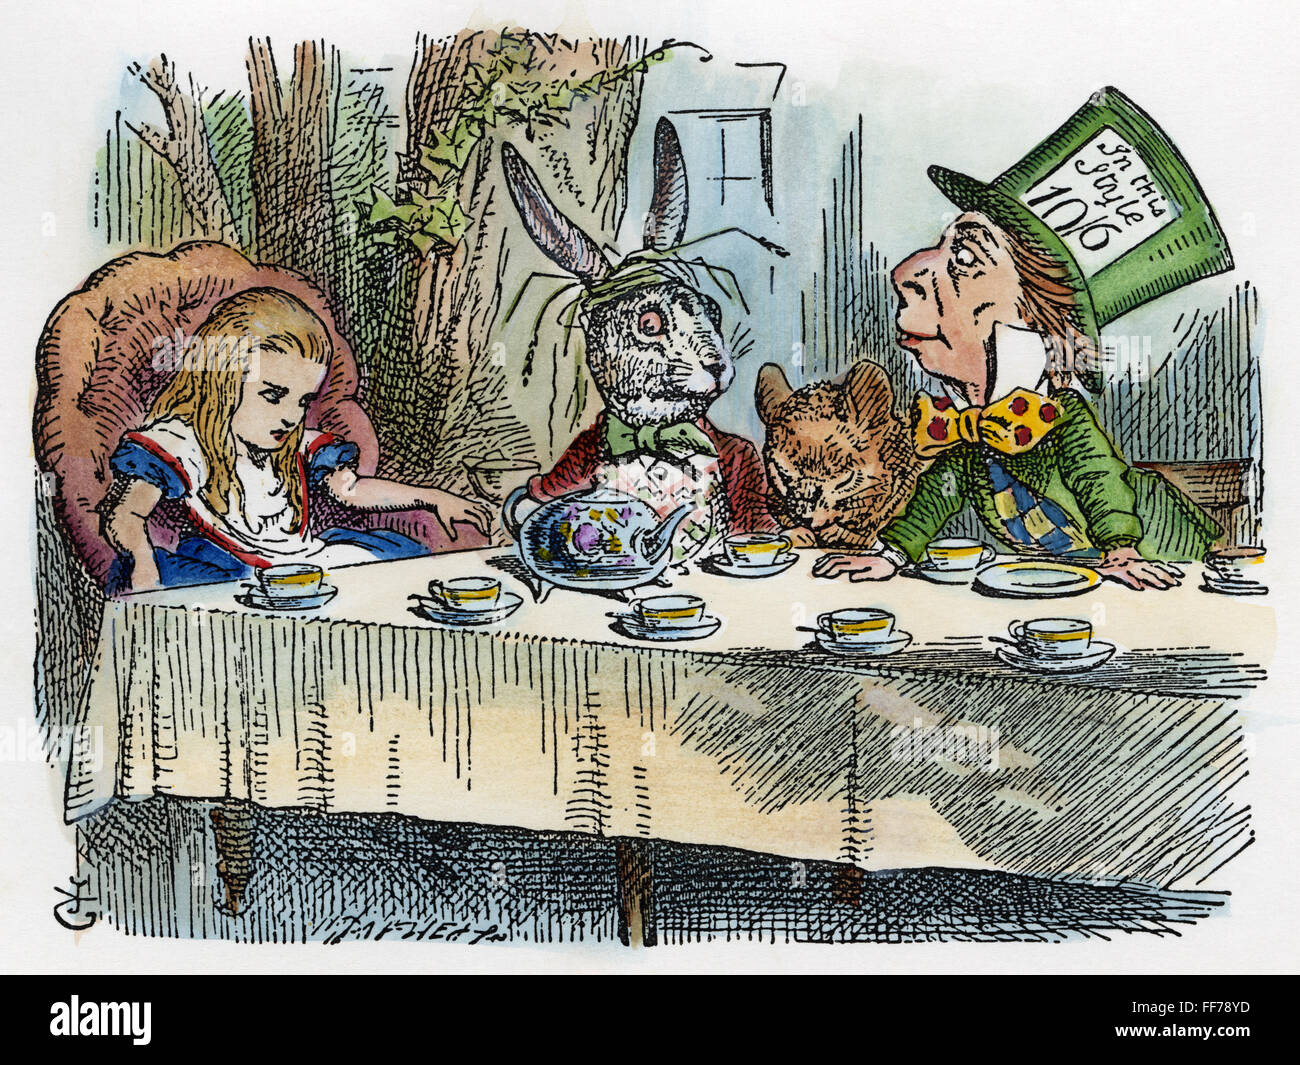 ALICE'S MAD-TEA PARTY, 1865. /nAlice joins the March Hare, the Hatter, and the Dormouse for a Mad-Tea Party. Wood engraving after the design by Sir John Tenniel for the first edition of Lewis Carroll's Alice adventures in Wonderland, 1865. Stock Photo